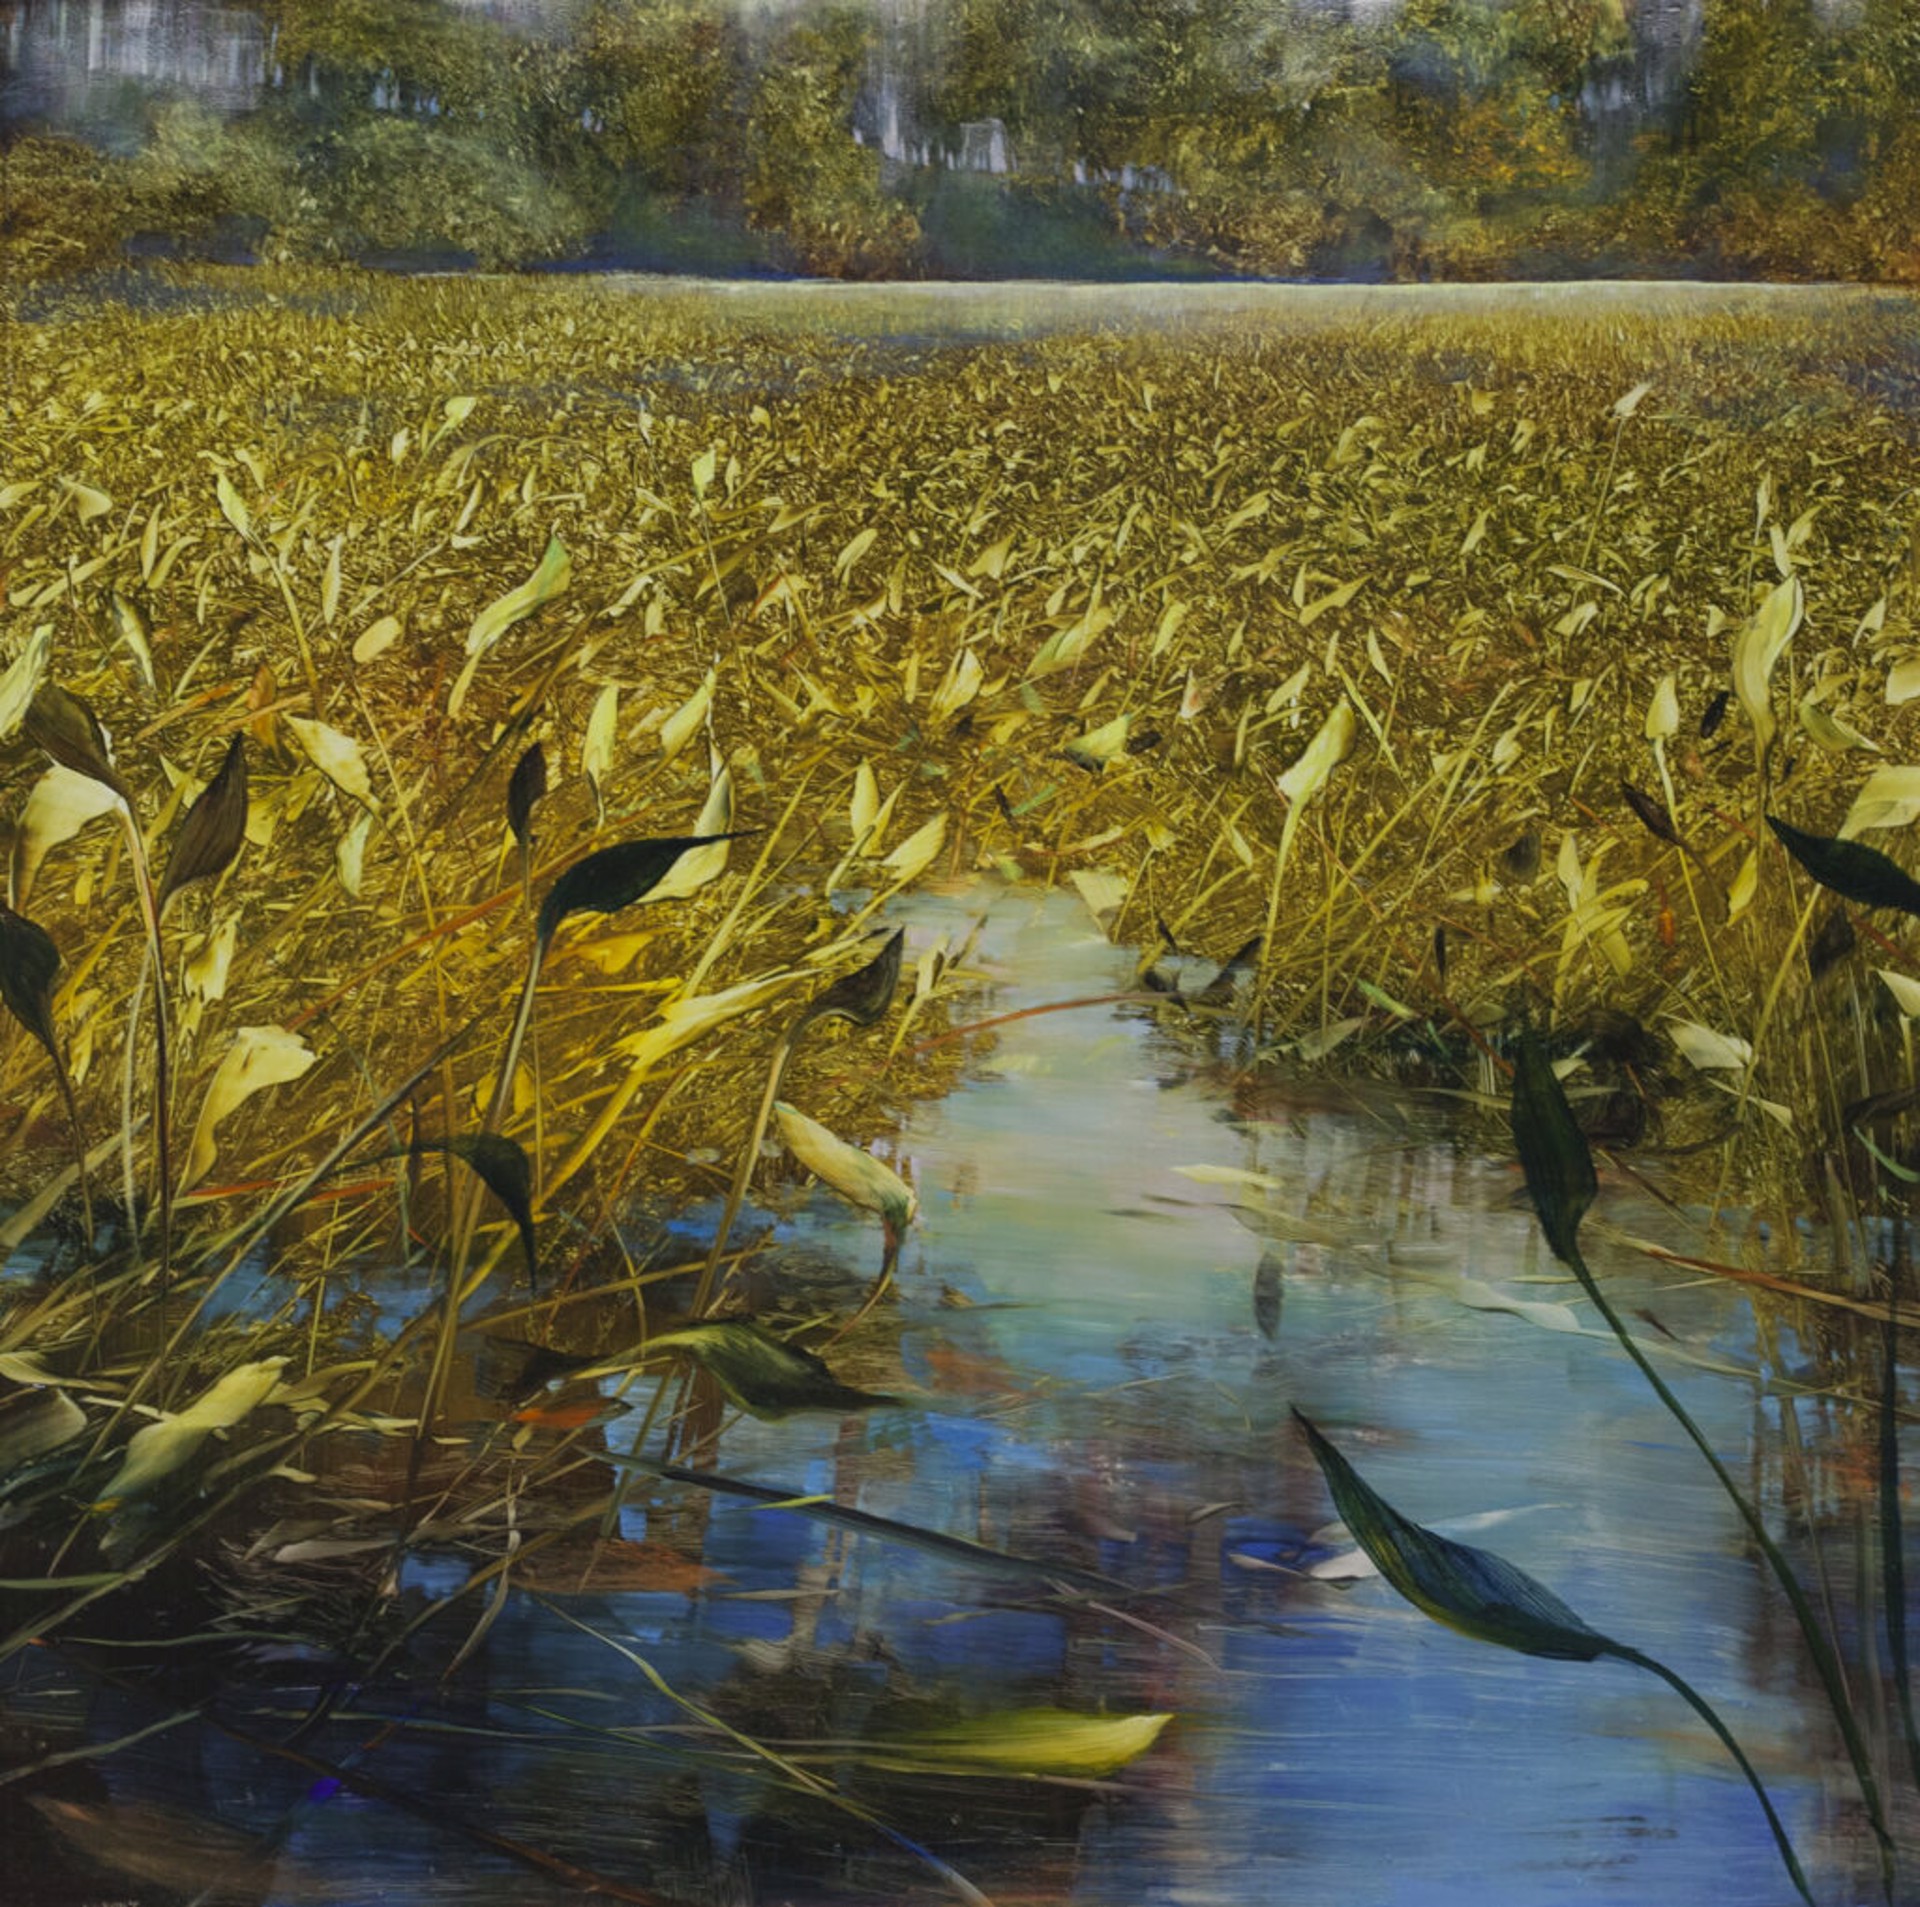 Pond Thick with Lilies by David Allen Dunlop